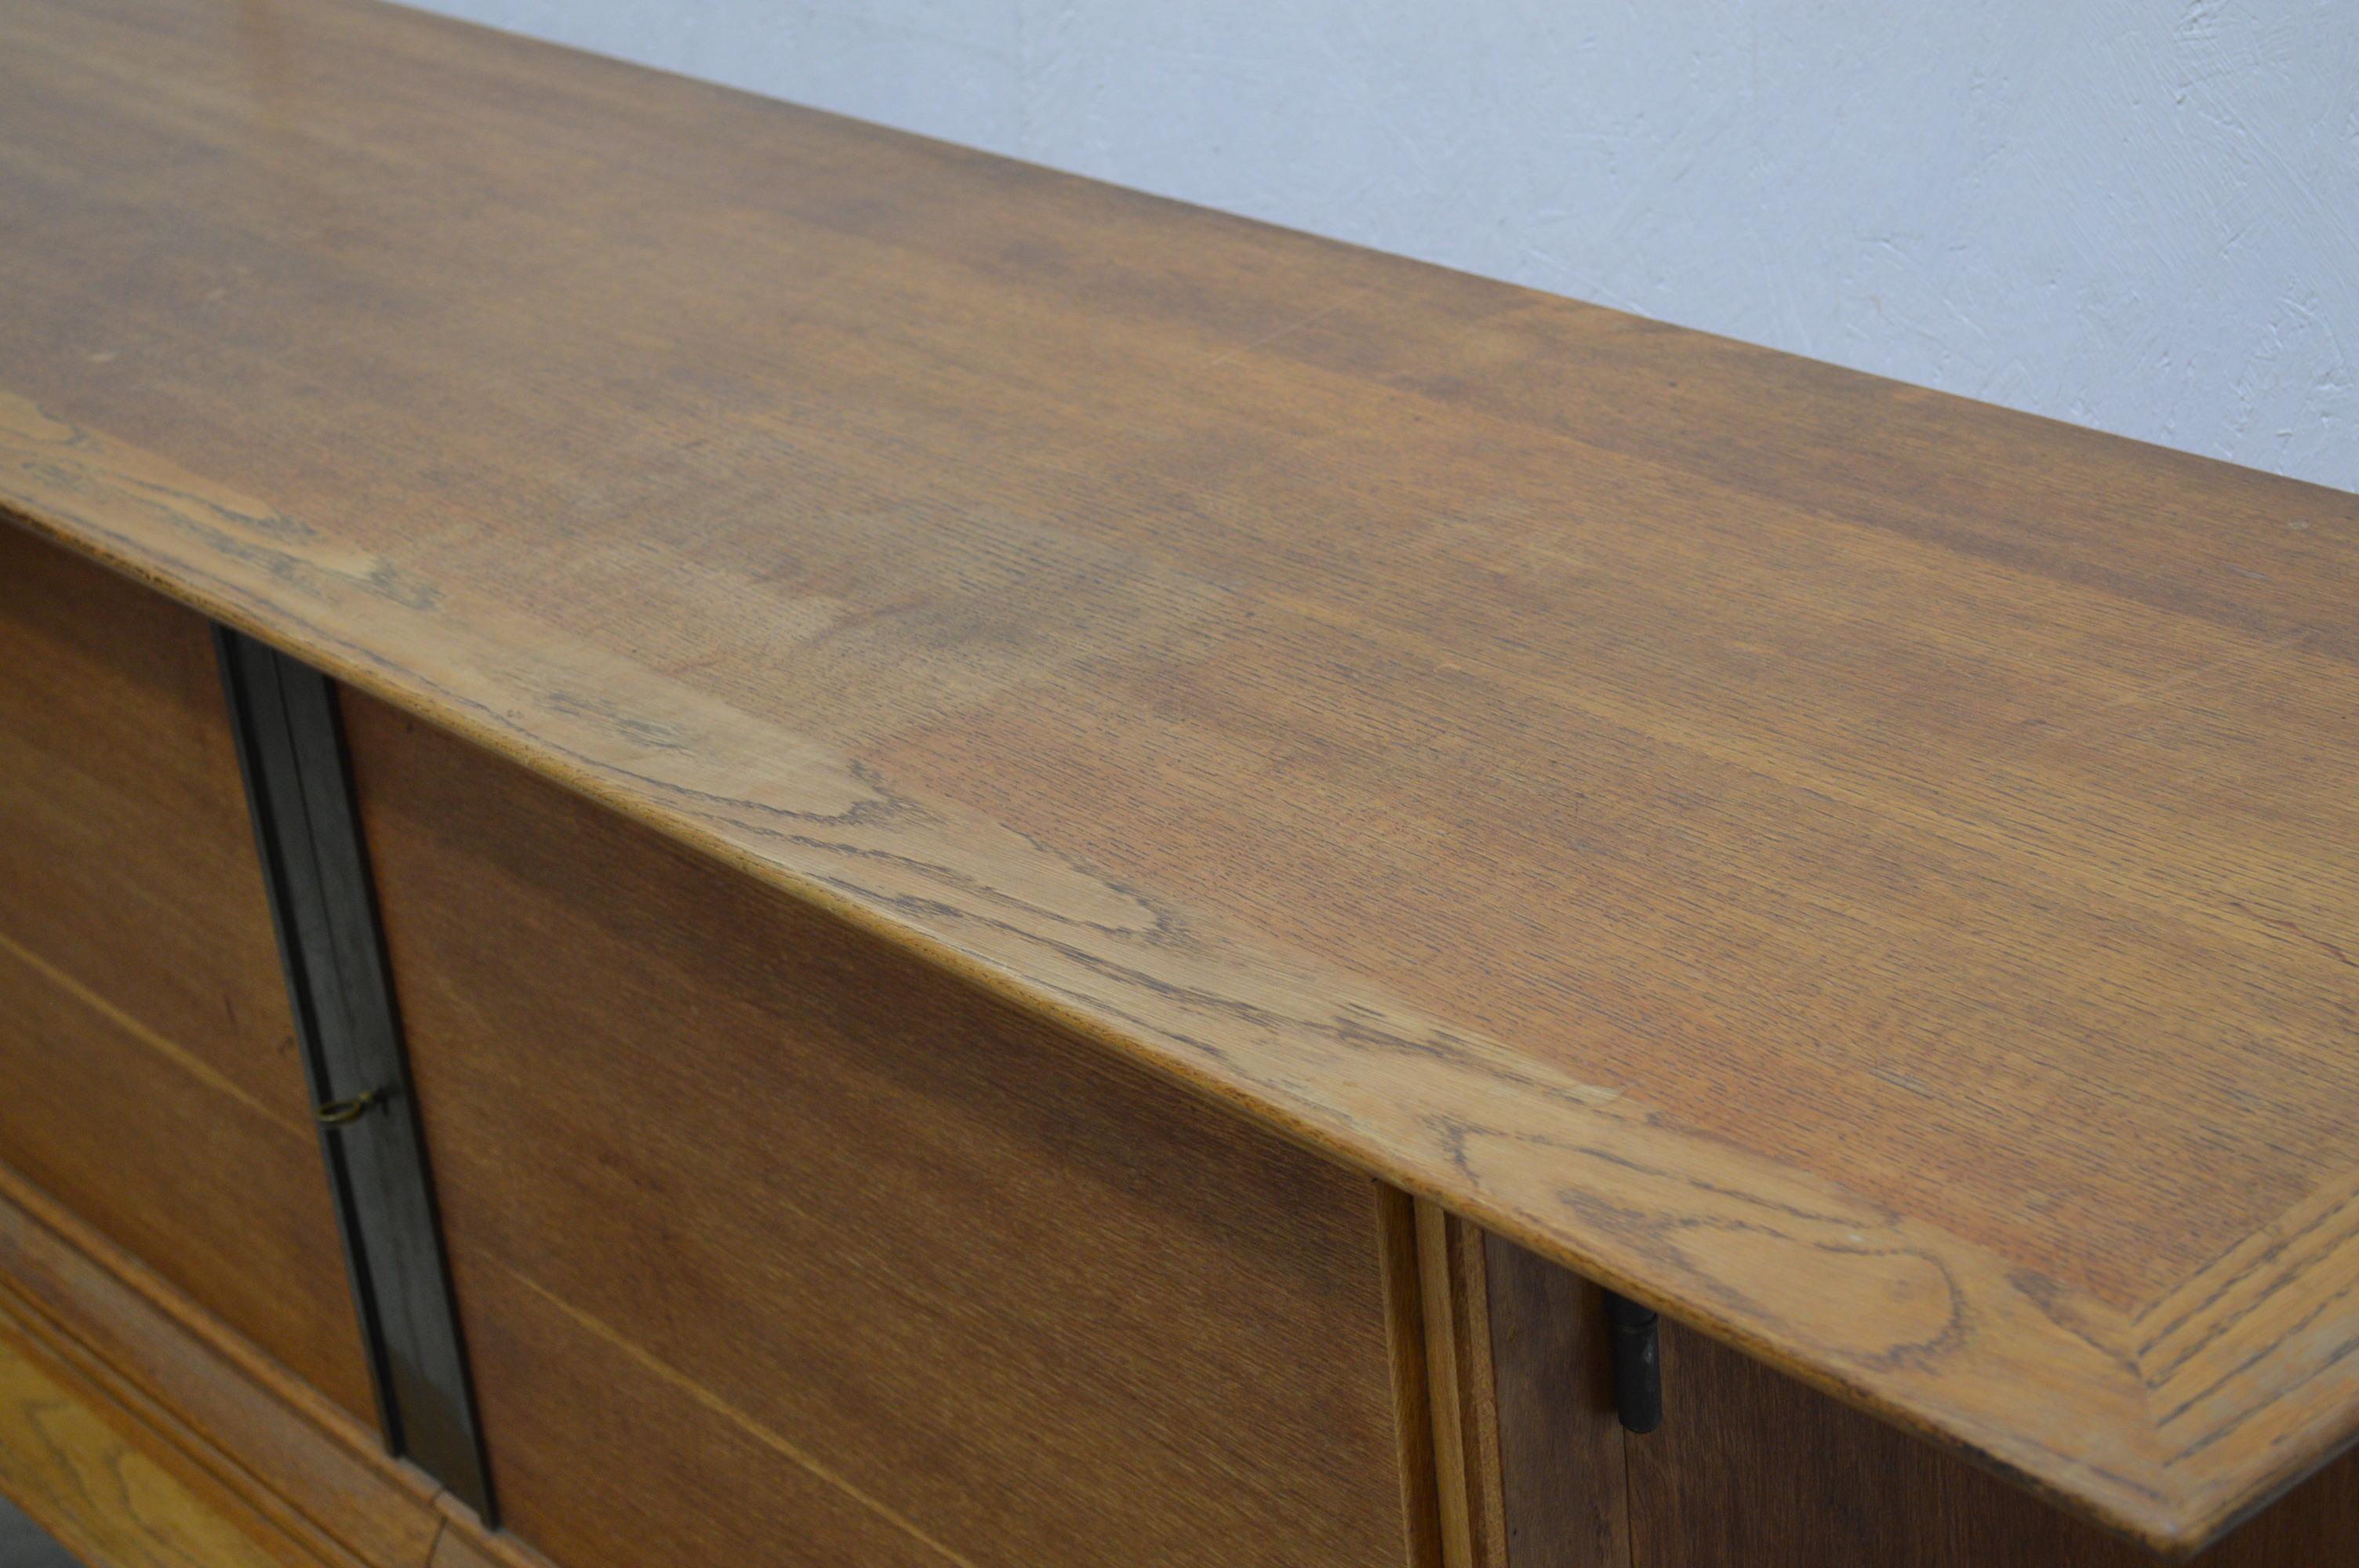 Hand-Crafted Oak Colette Gueden Japanese Style Credenza Sideboard 1940s For Sale